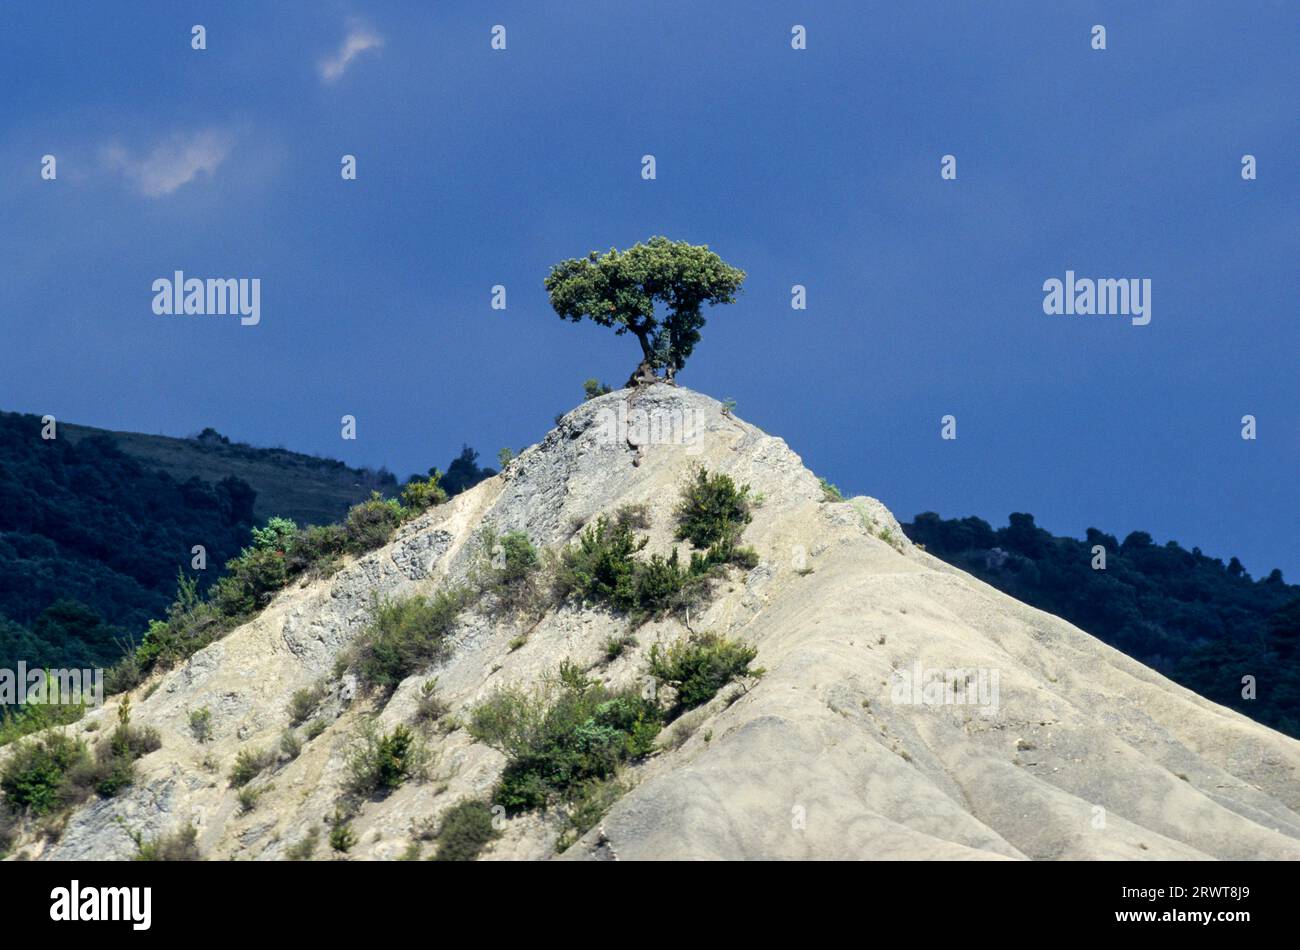 Spanish Juniper on the top of a sand dune, Valley of Hecho, Spain Stock Photo